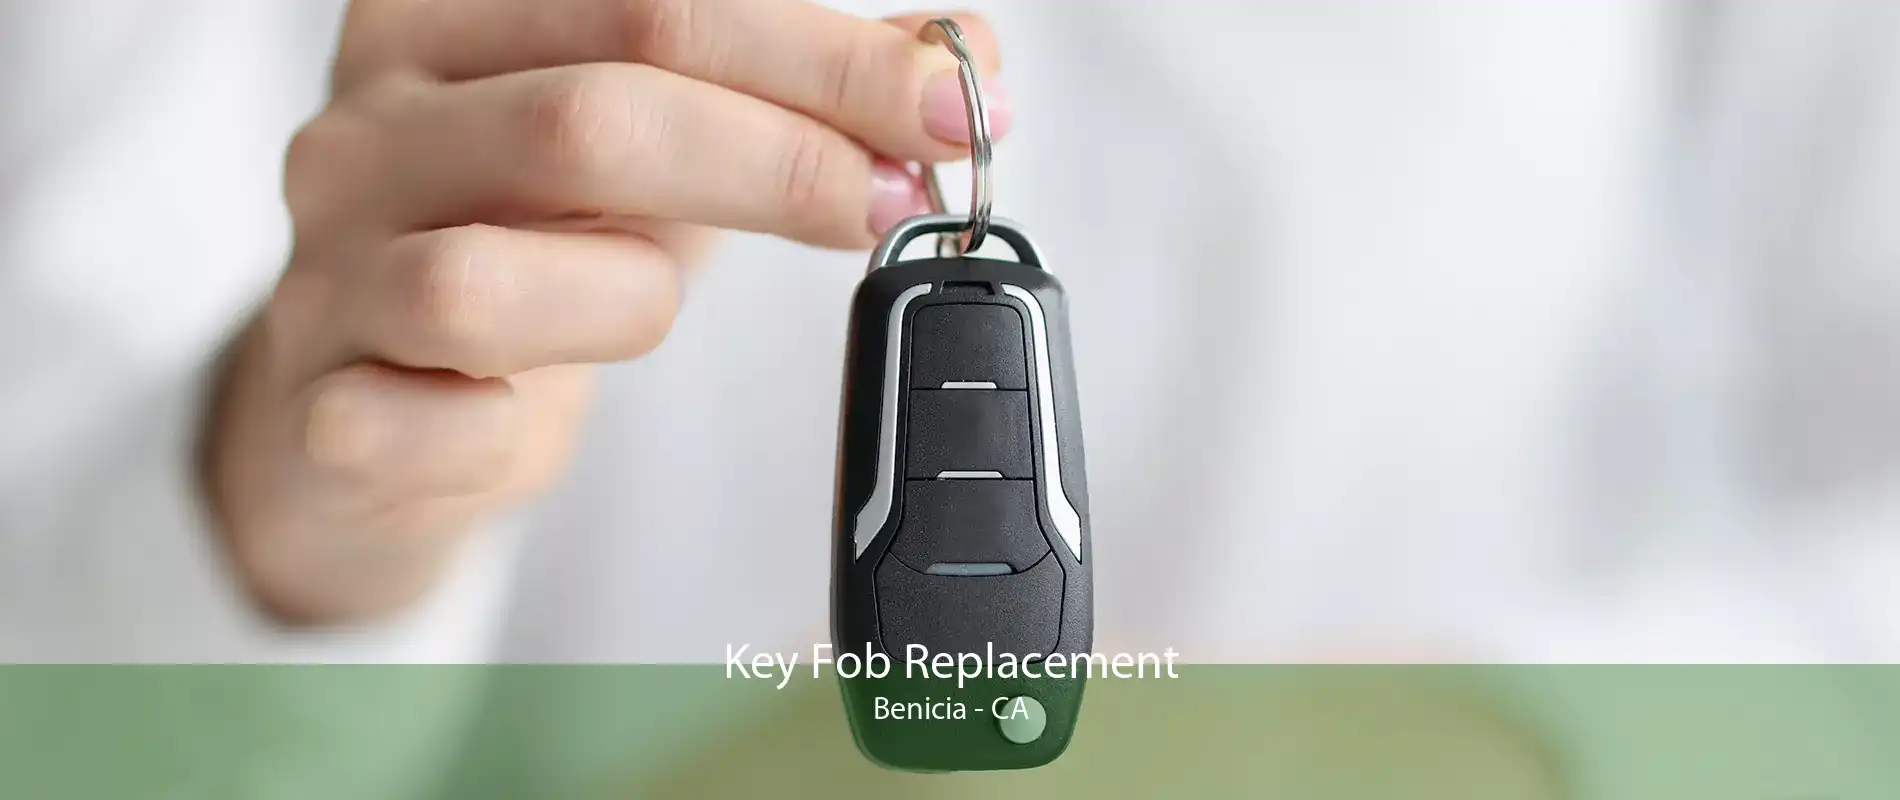 Key Fob Replacement Benicia - CA